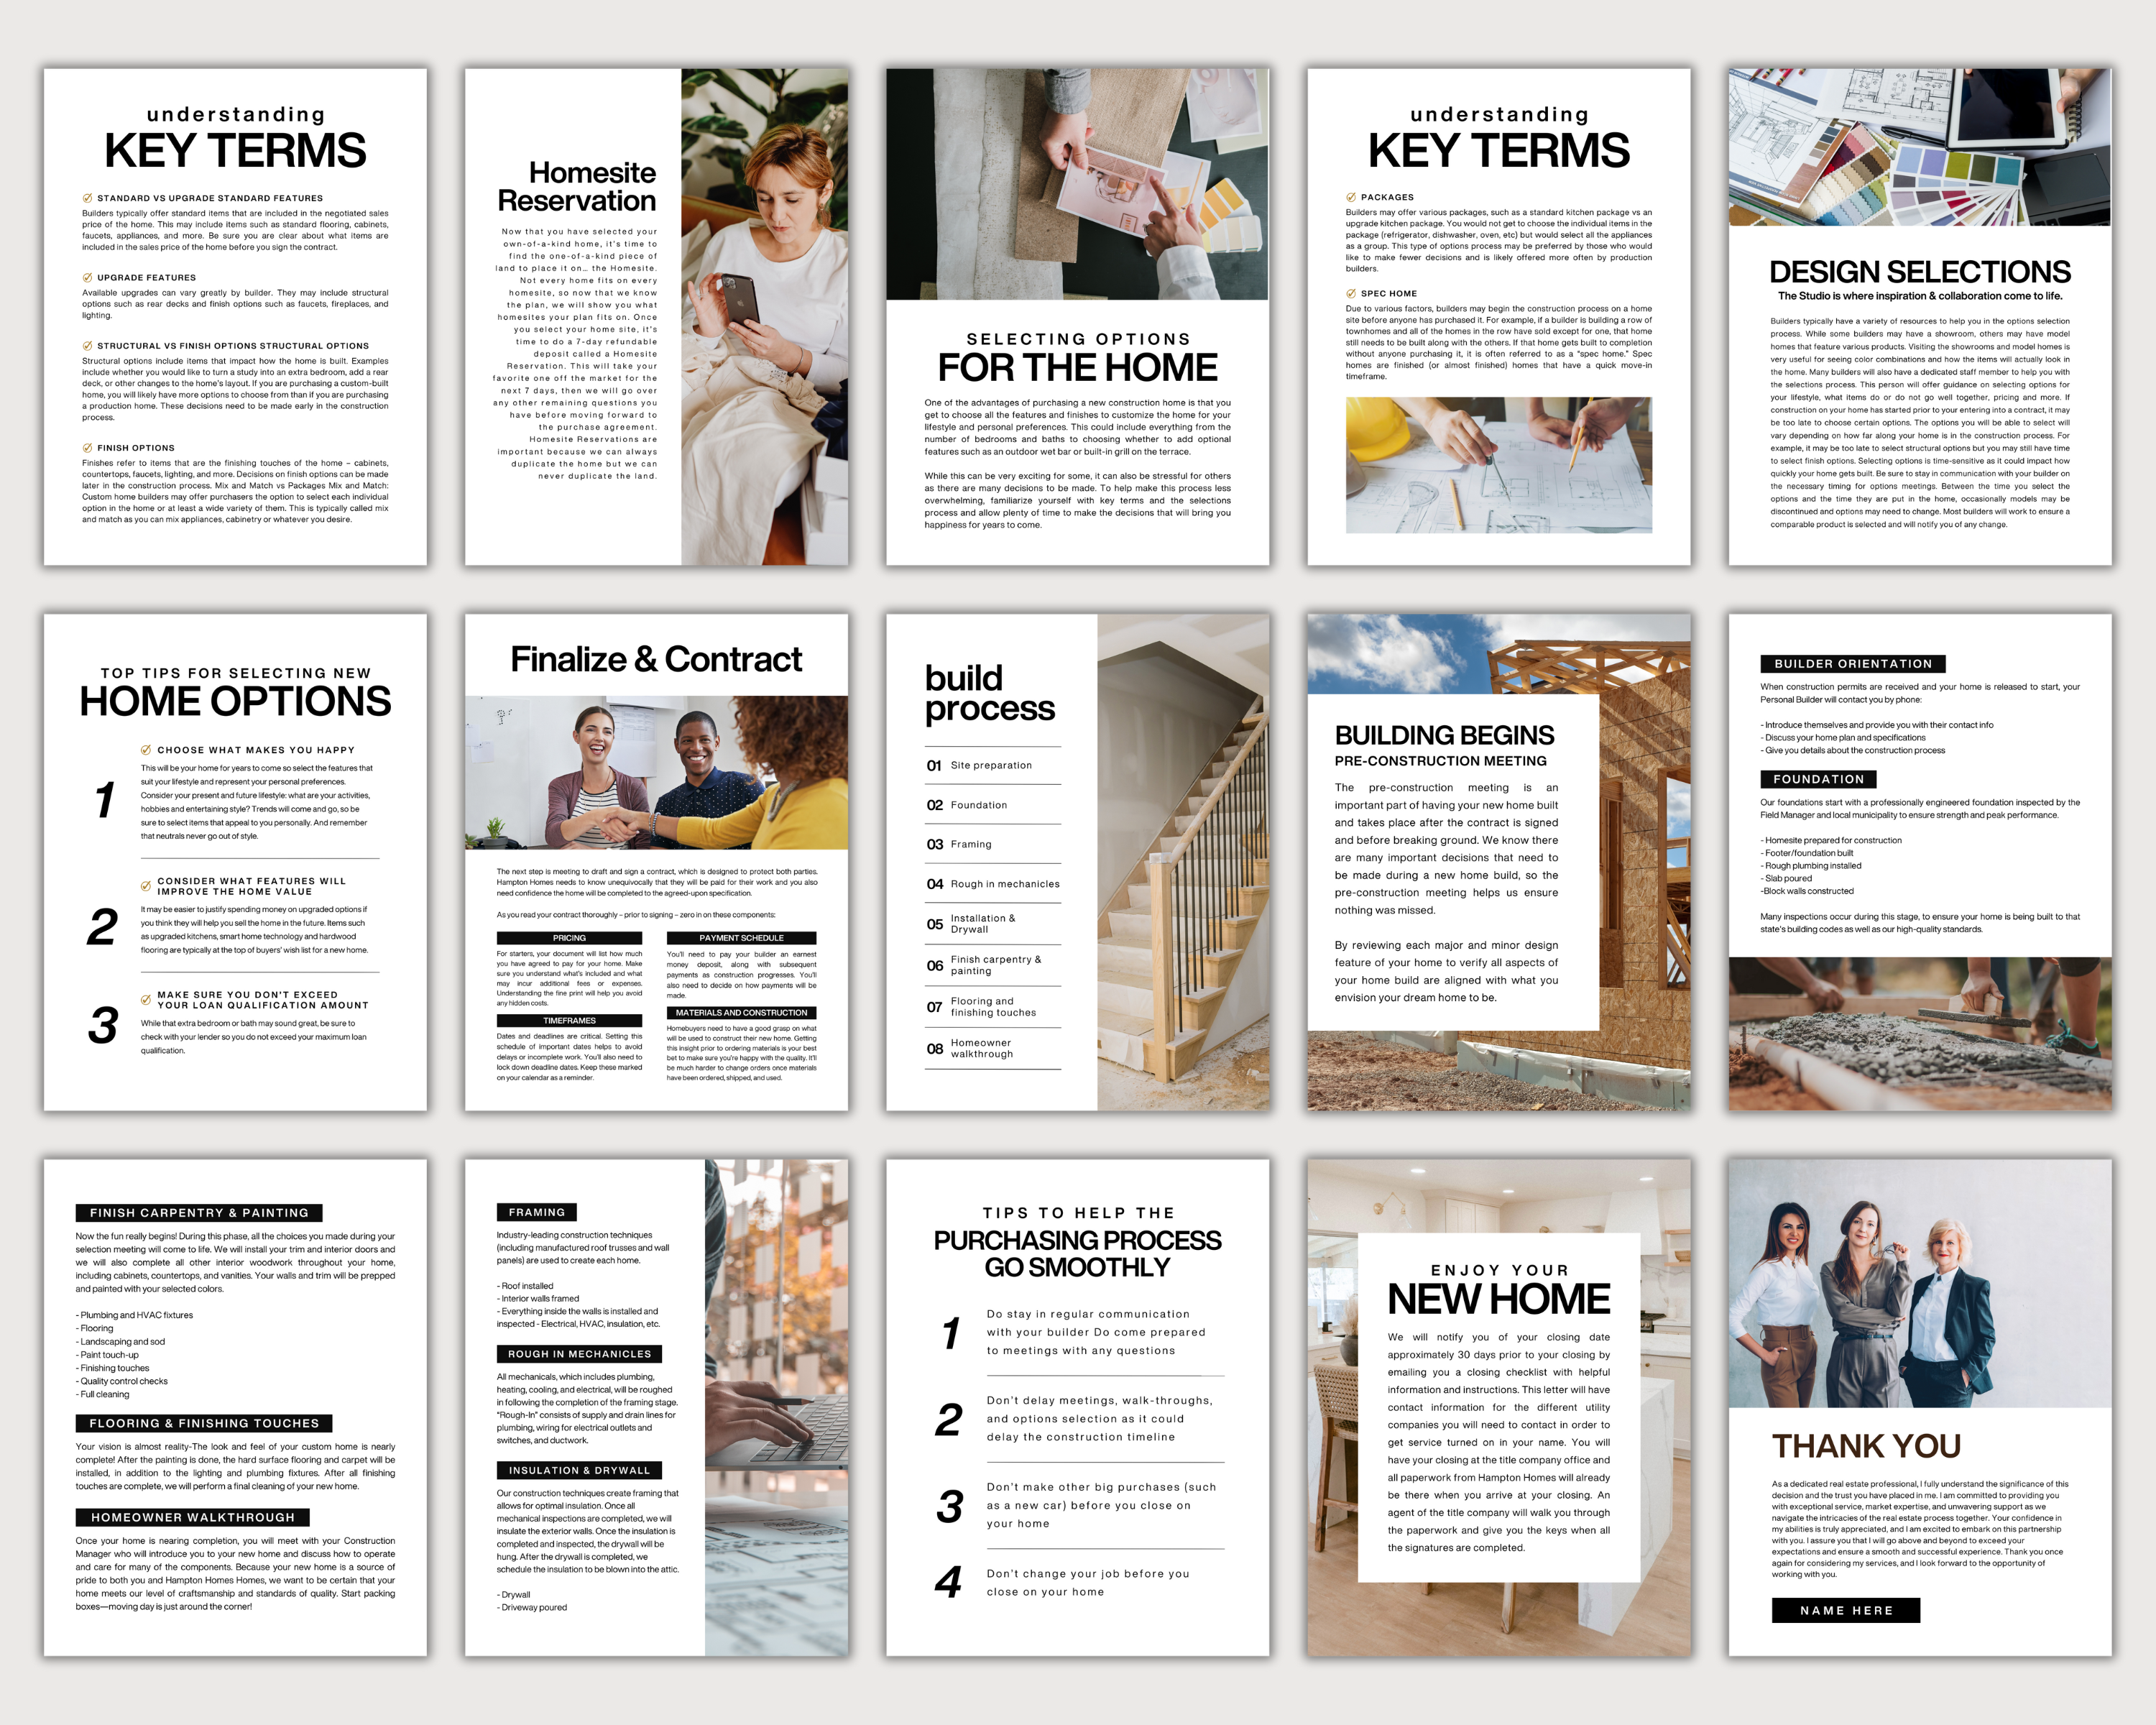 Real Estate New Construction Guide, Real Estate Farming, New home Construction Checklist, Real Estate Marketing, Home Builder Canva Template